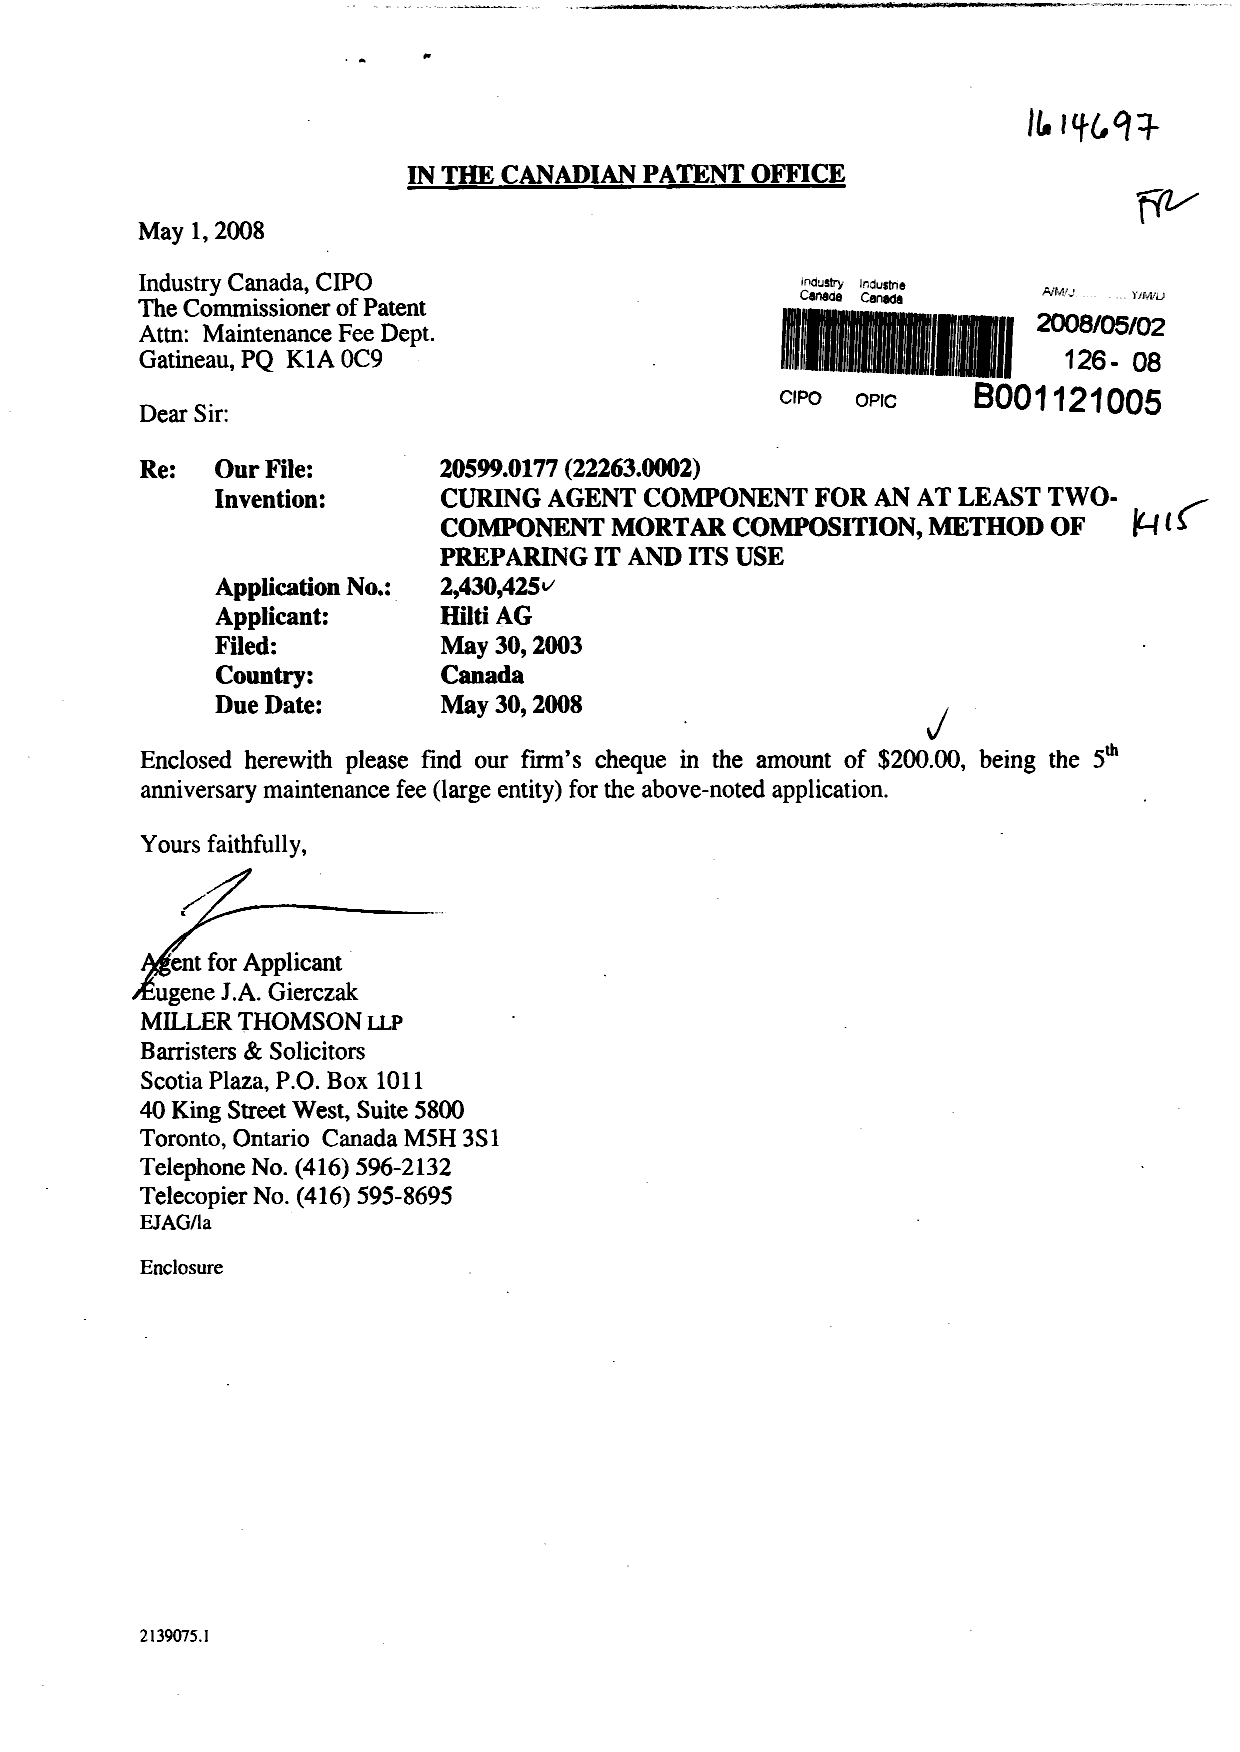 Canadian Patent Document 2430425. Fees 20080502. Image 1 of 1